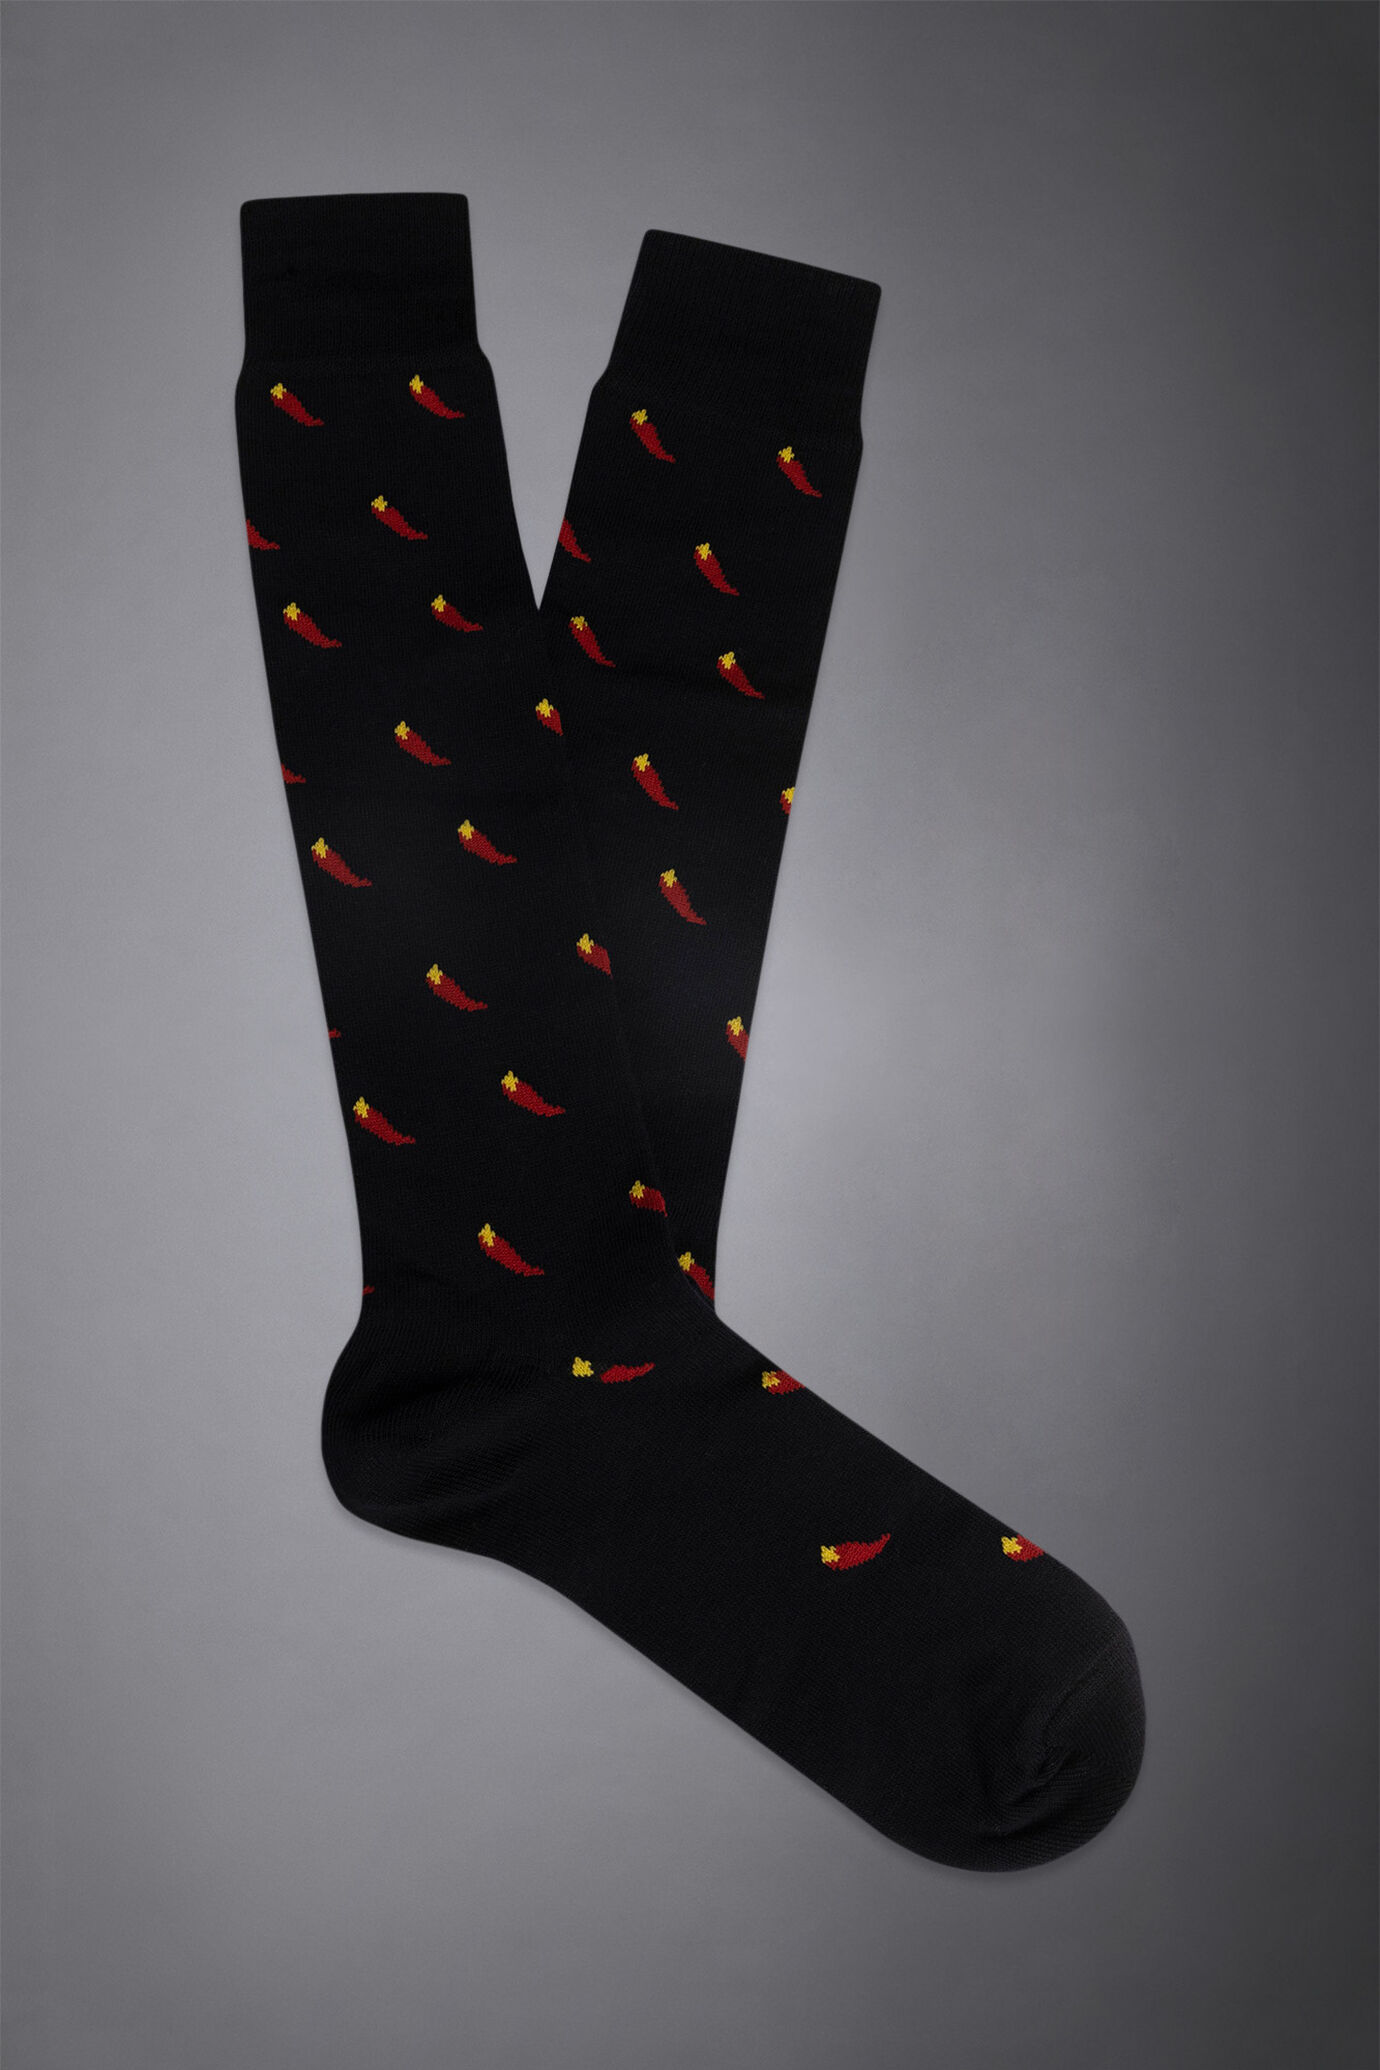 Knitted long socks with chili pepper pattern made in italy